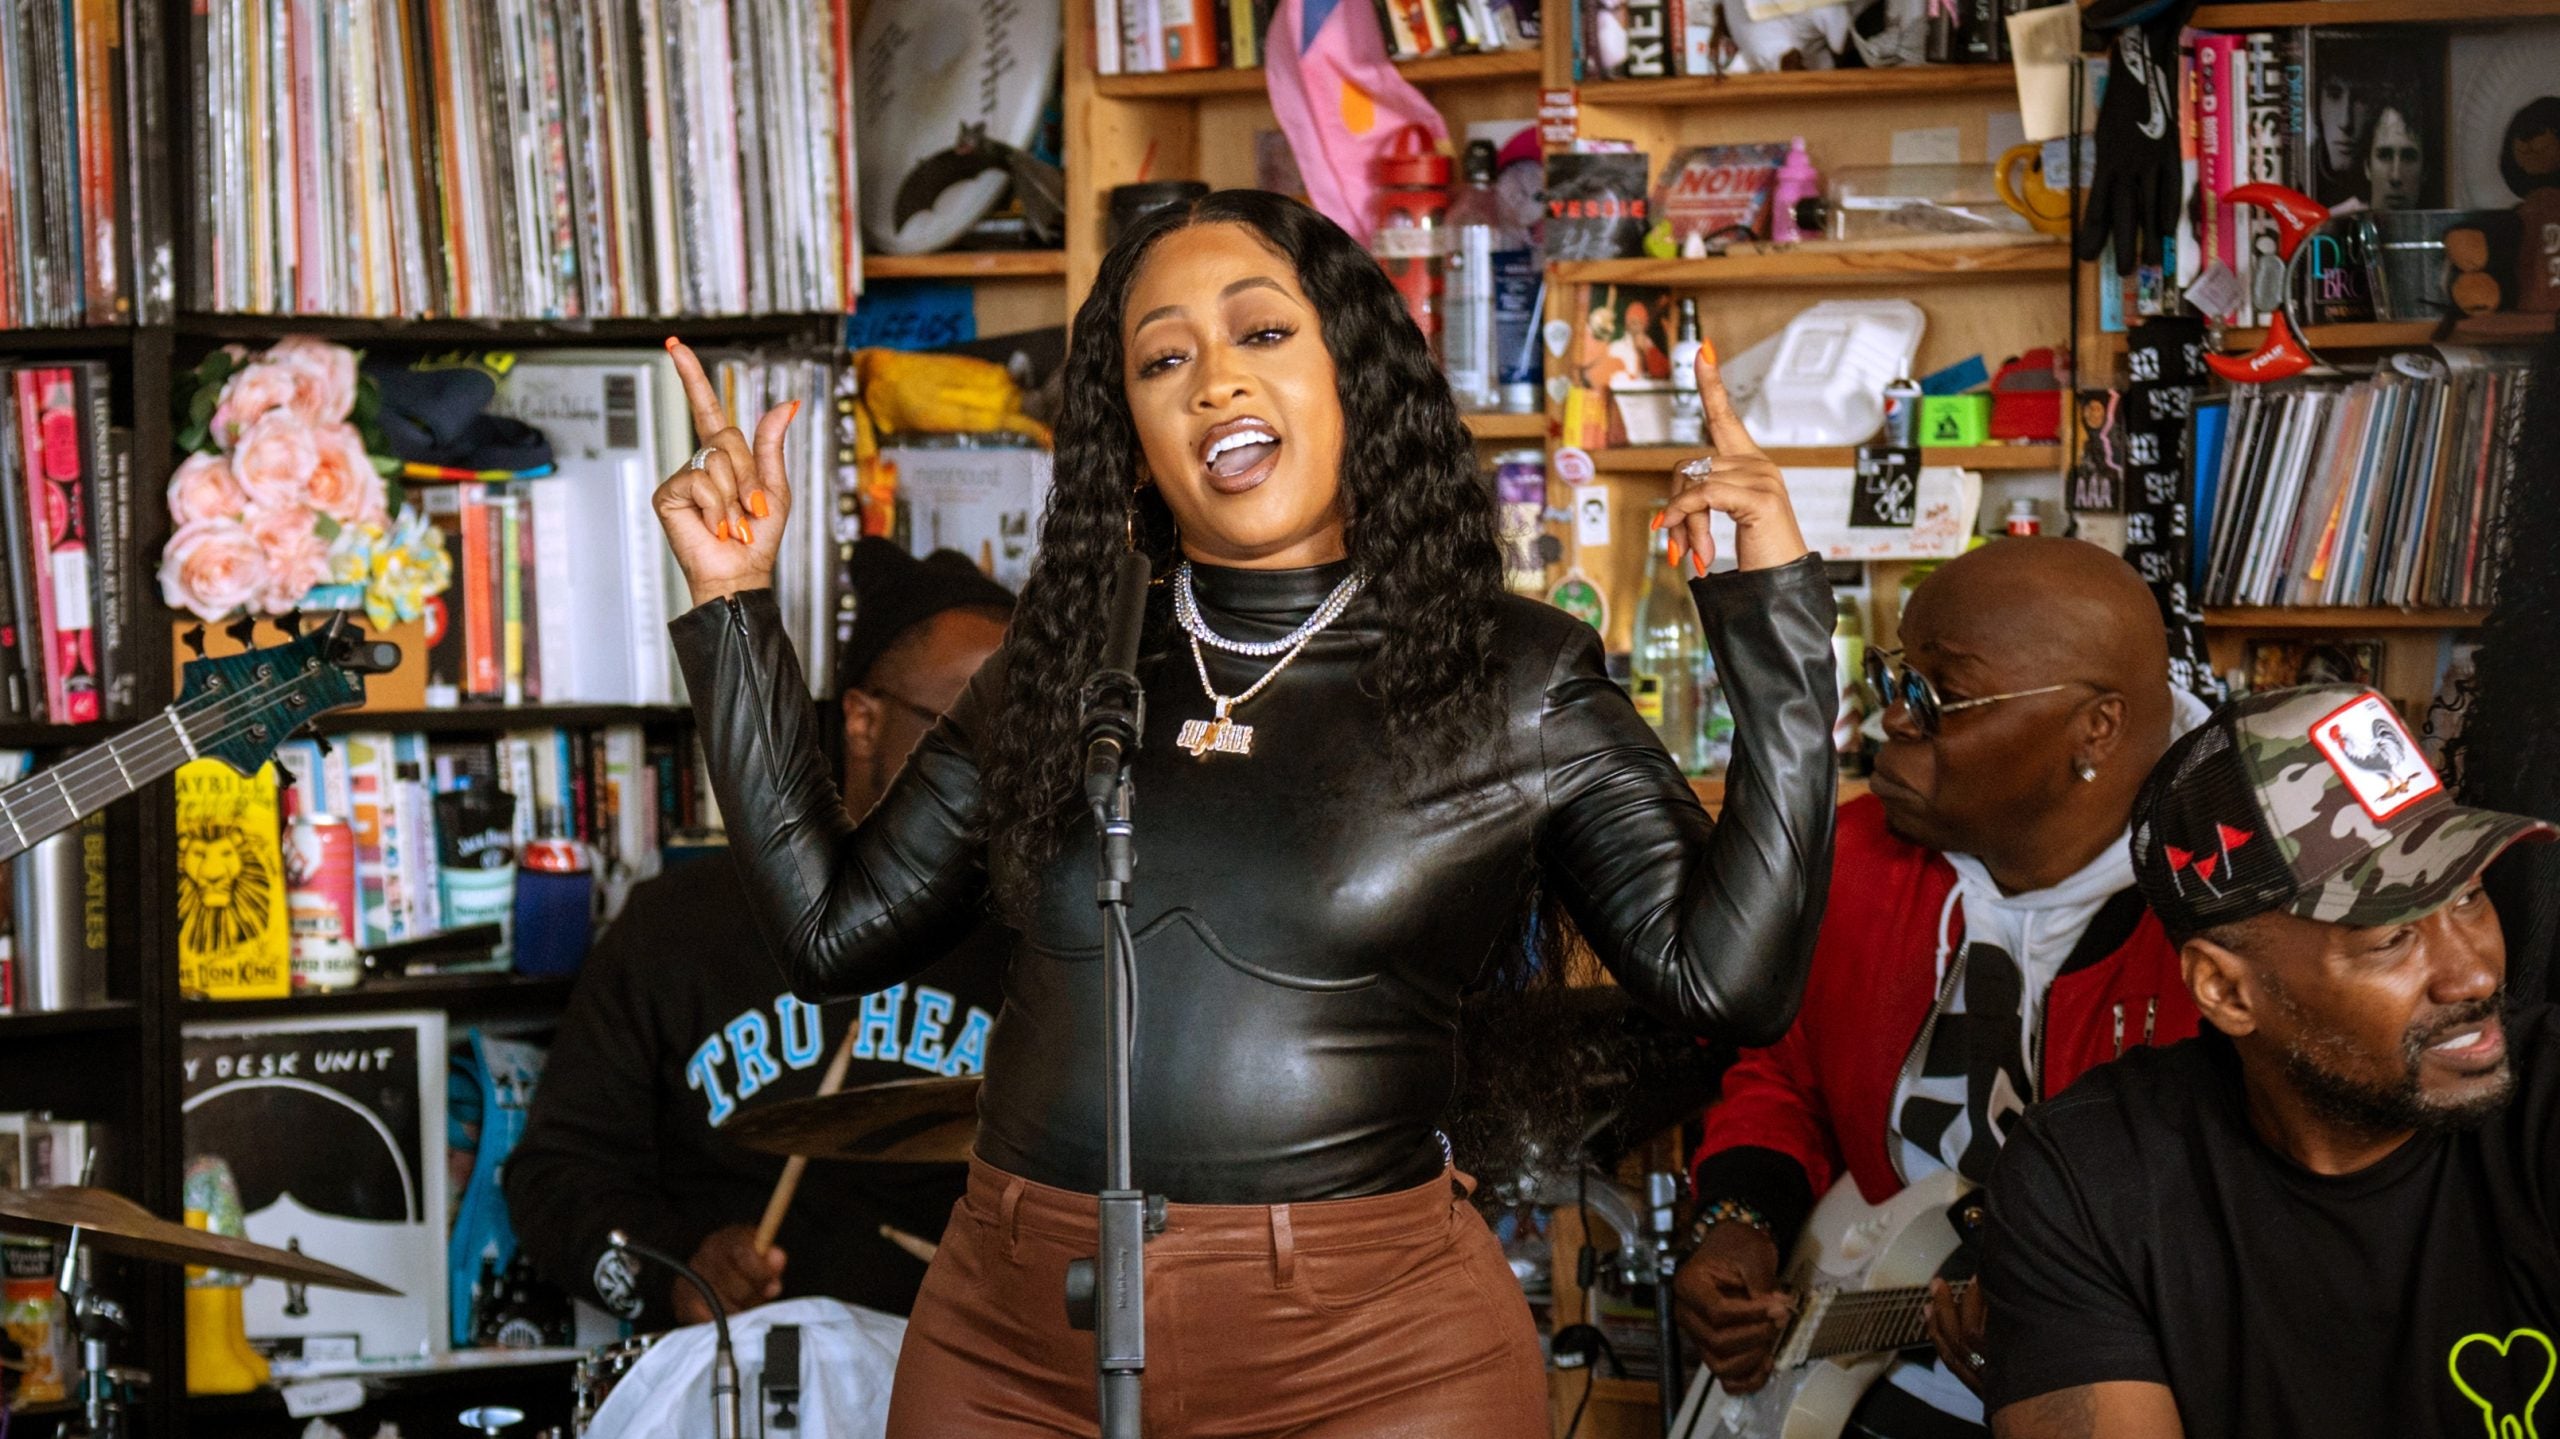 WATCH: Trina Delivers An Unforgettable Performance On NPR’s ‘Tiny Desk’